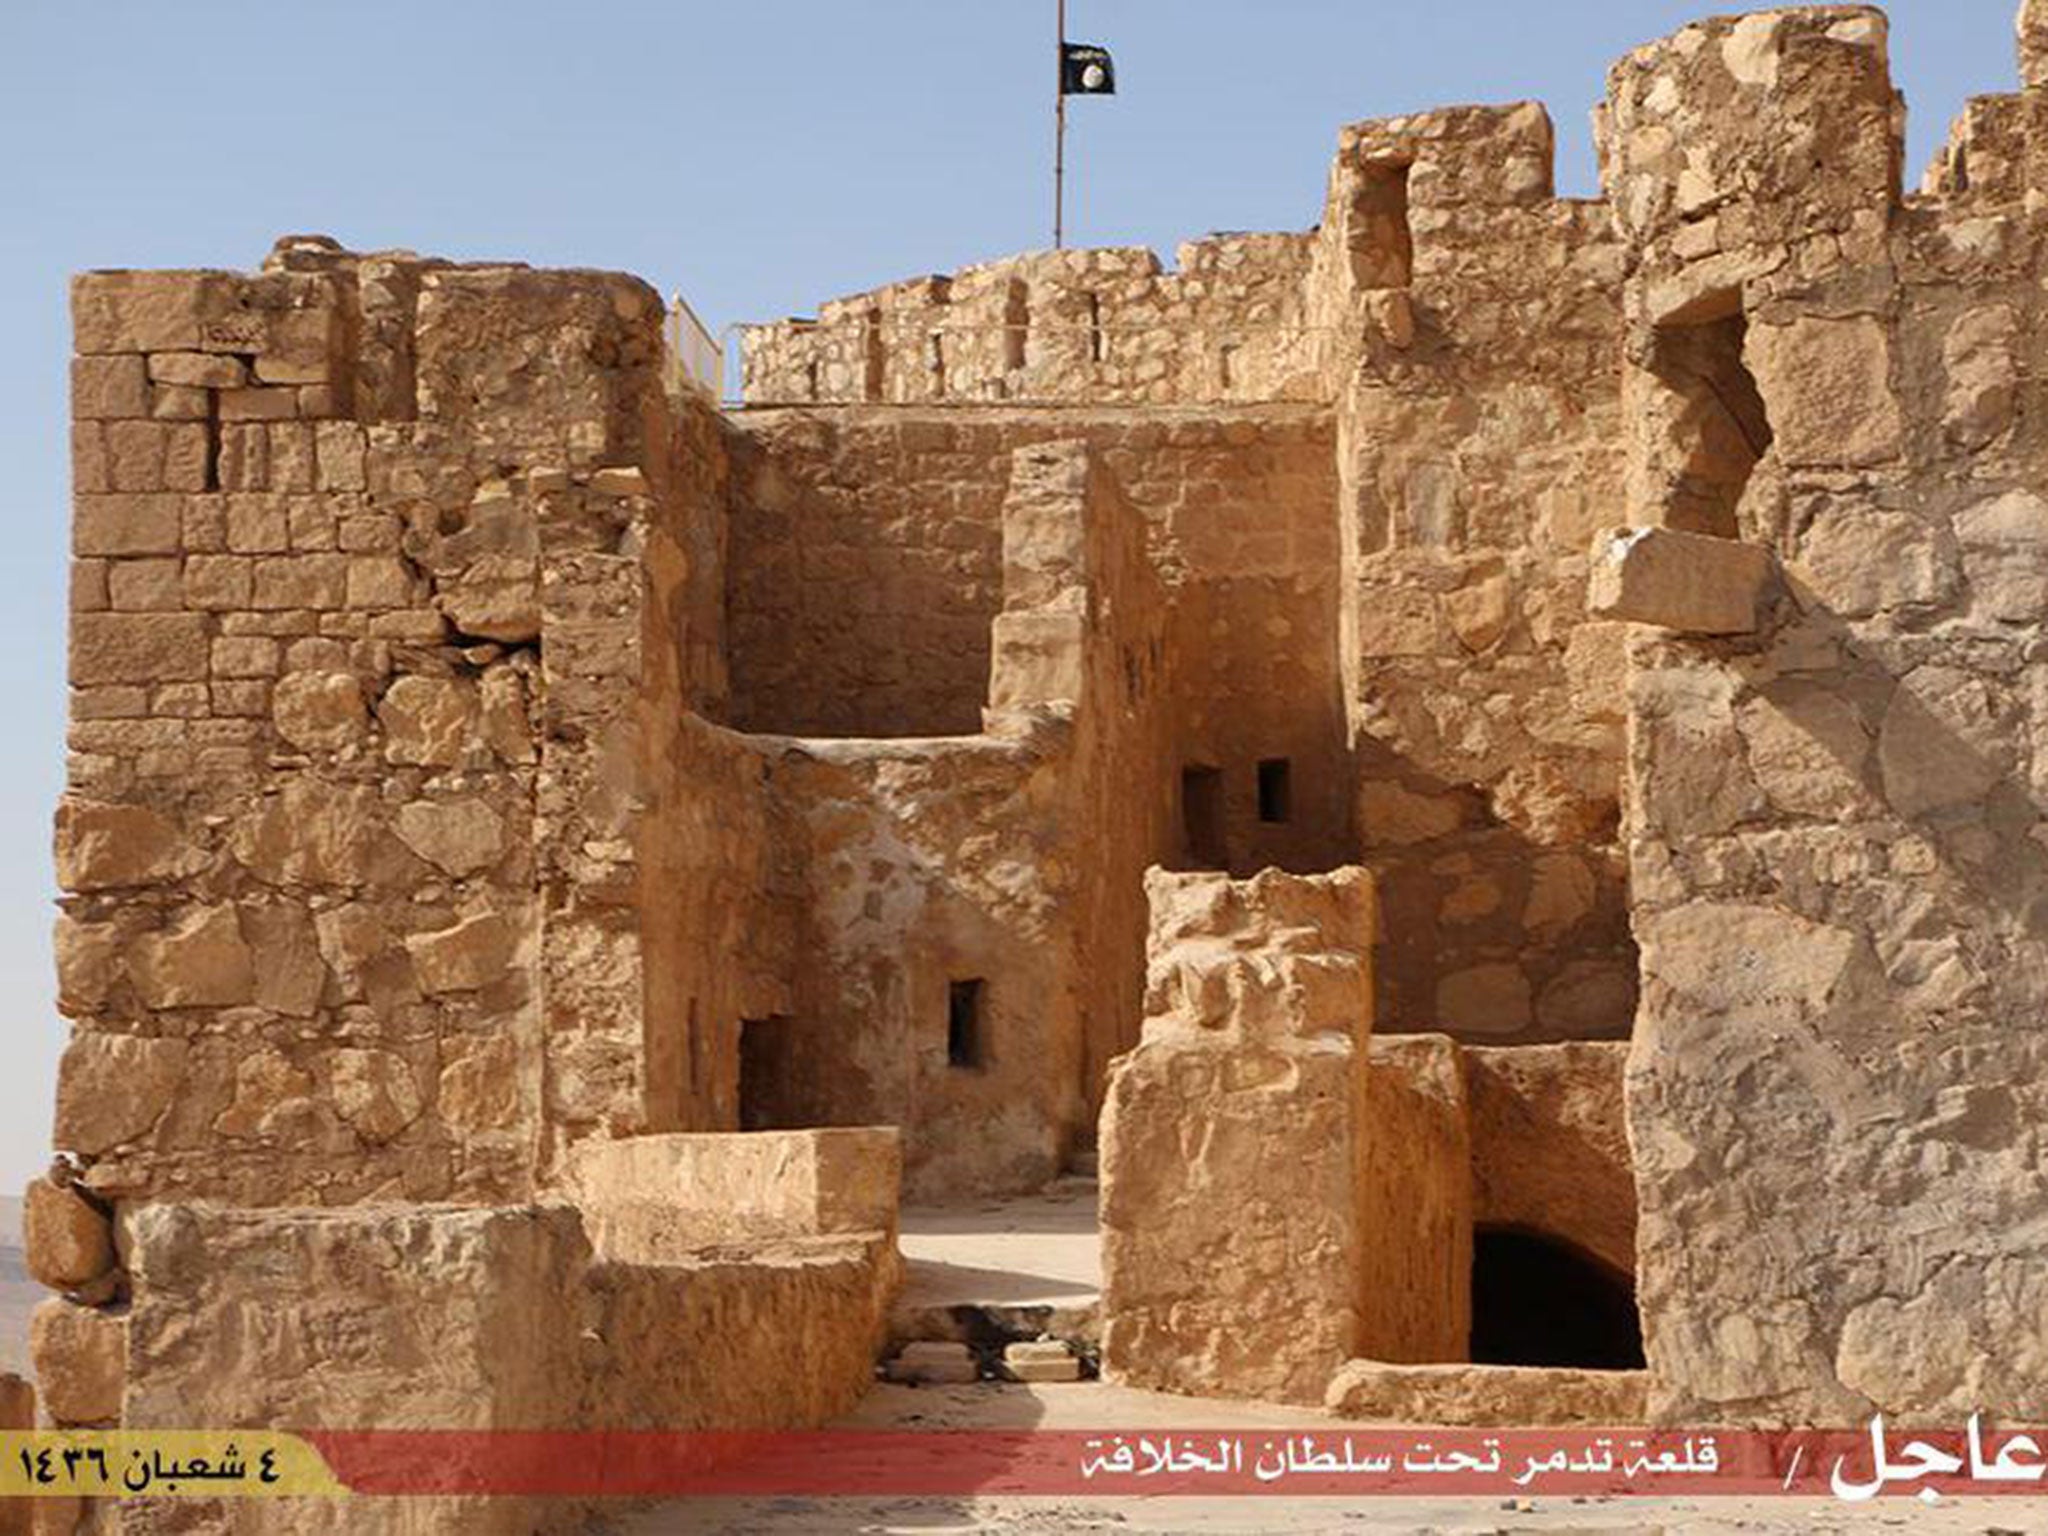 Isis have raised their flag over an ancient ruin in the city of Palmyra